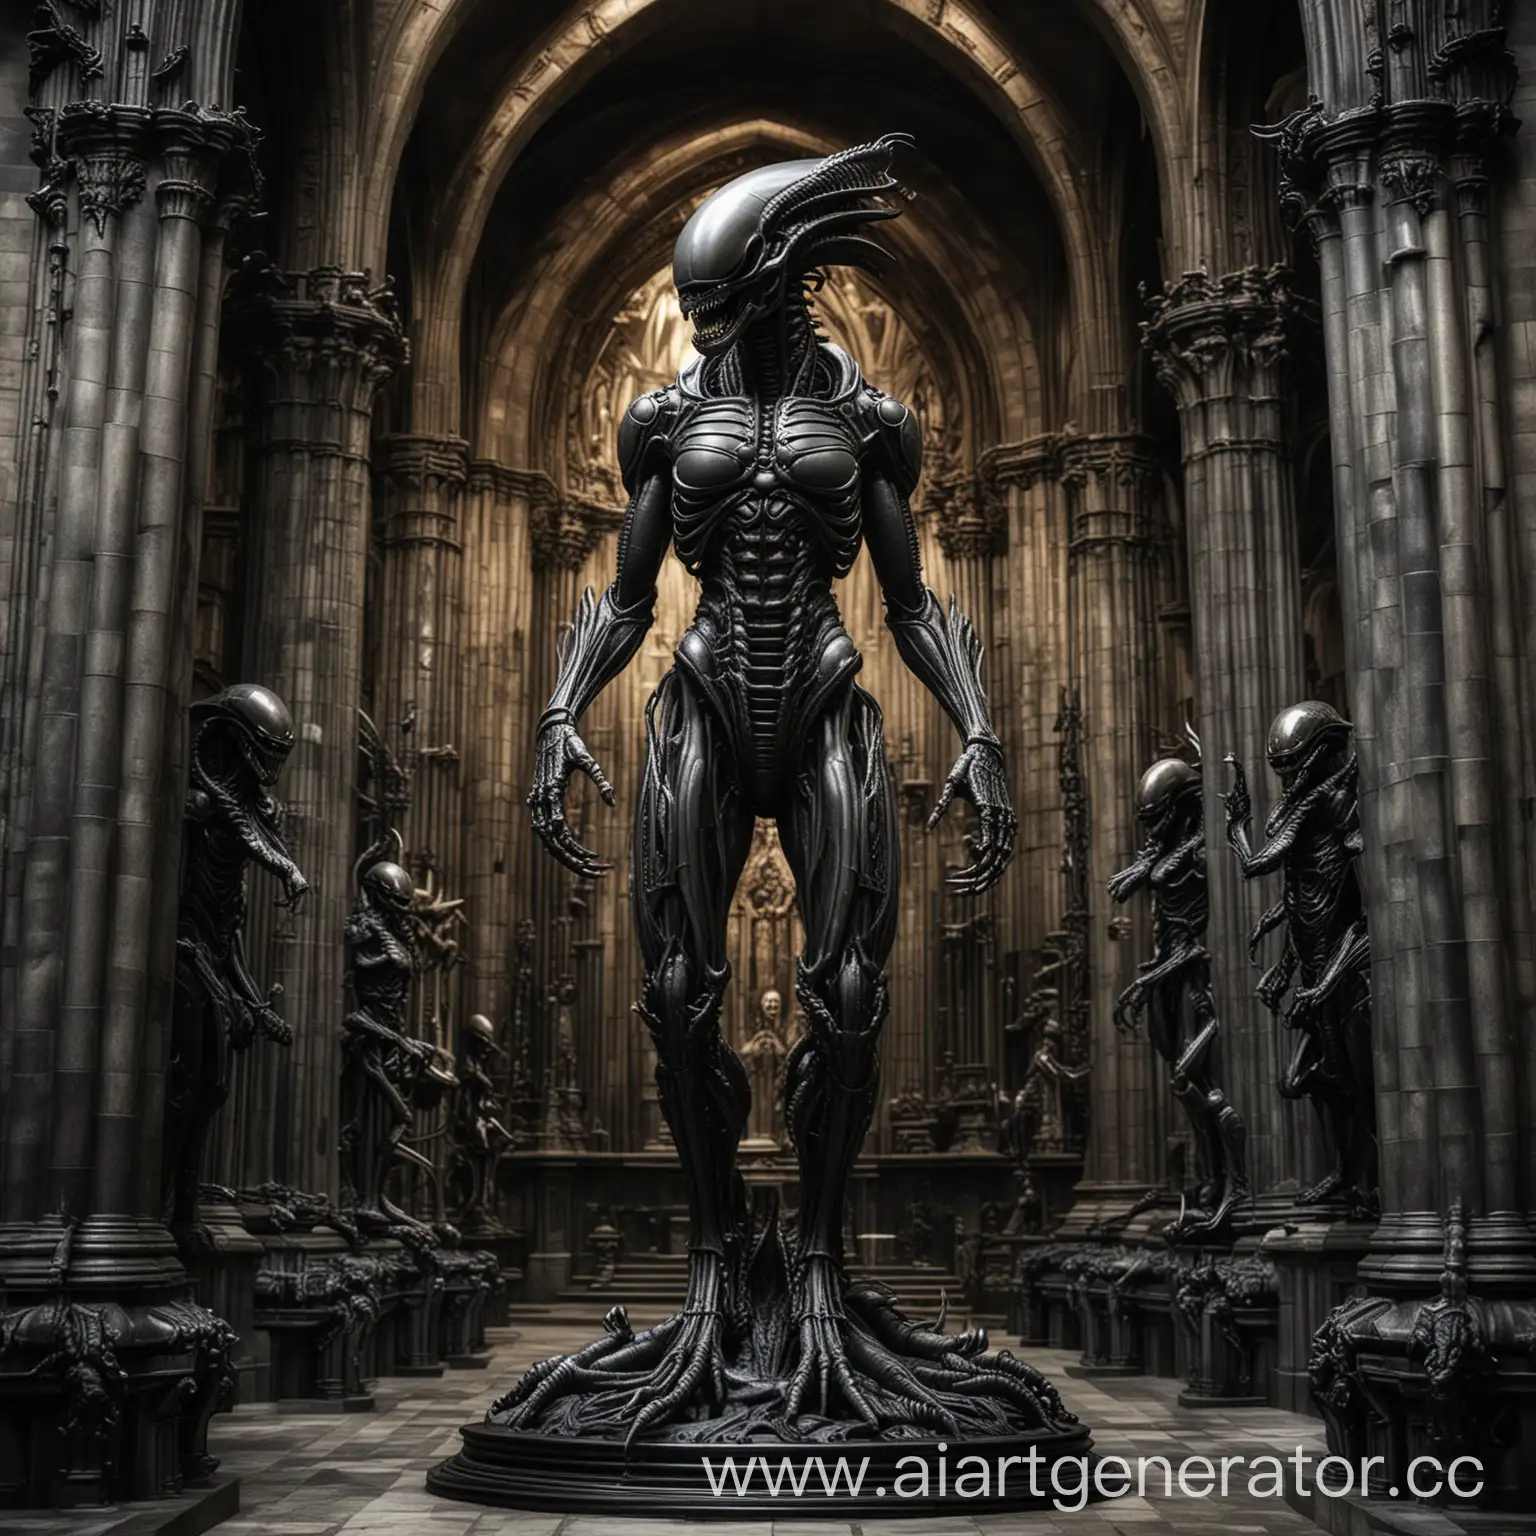 Giger-Style-Alien-Xenomorph-Statue-in-Gothic-Cathedral